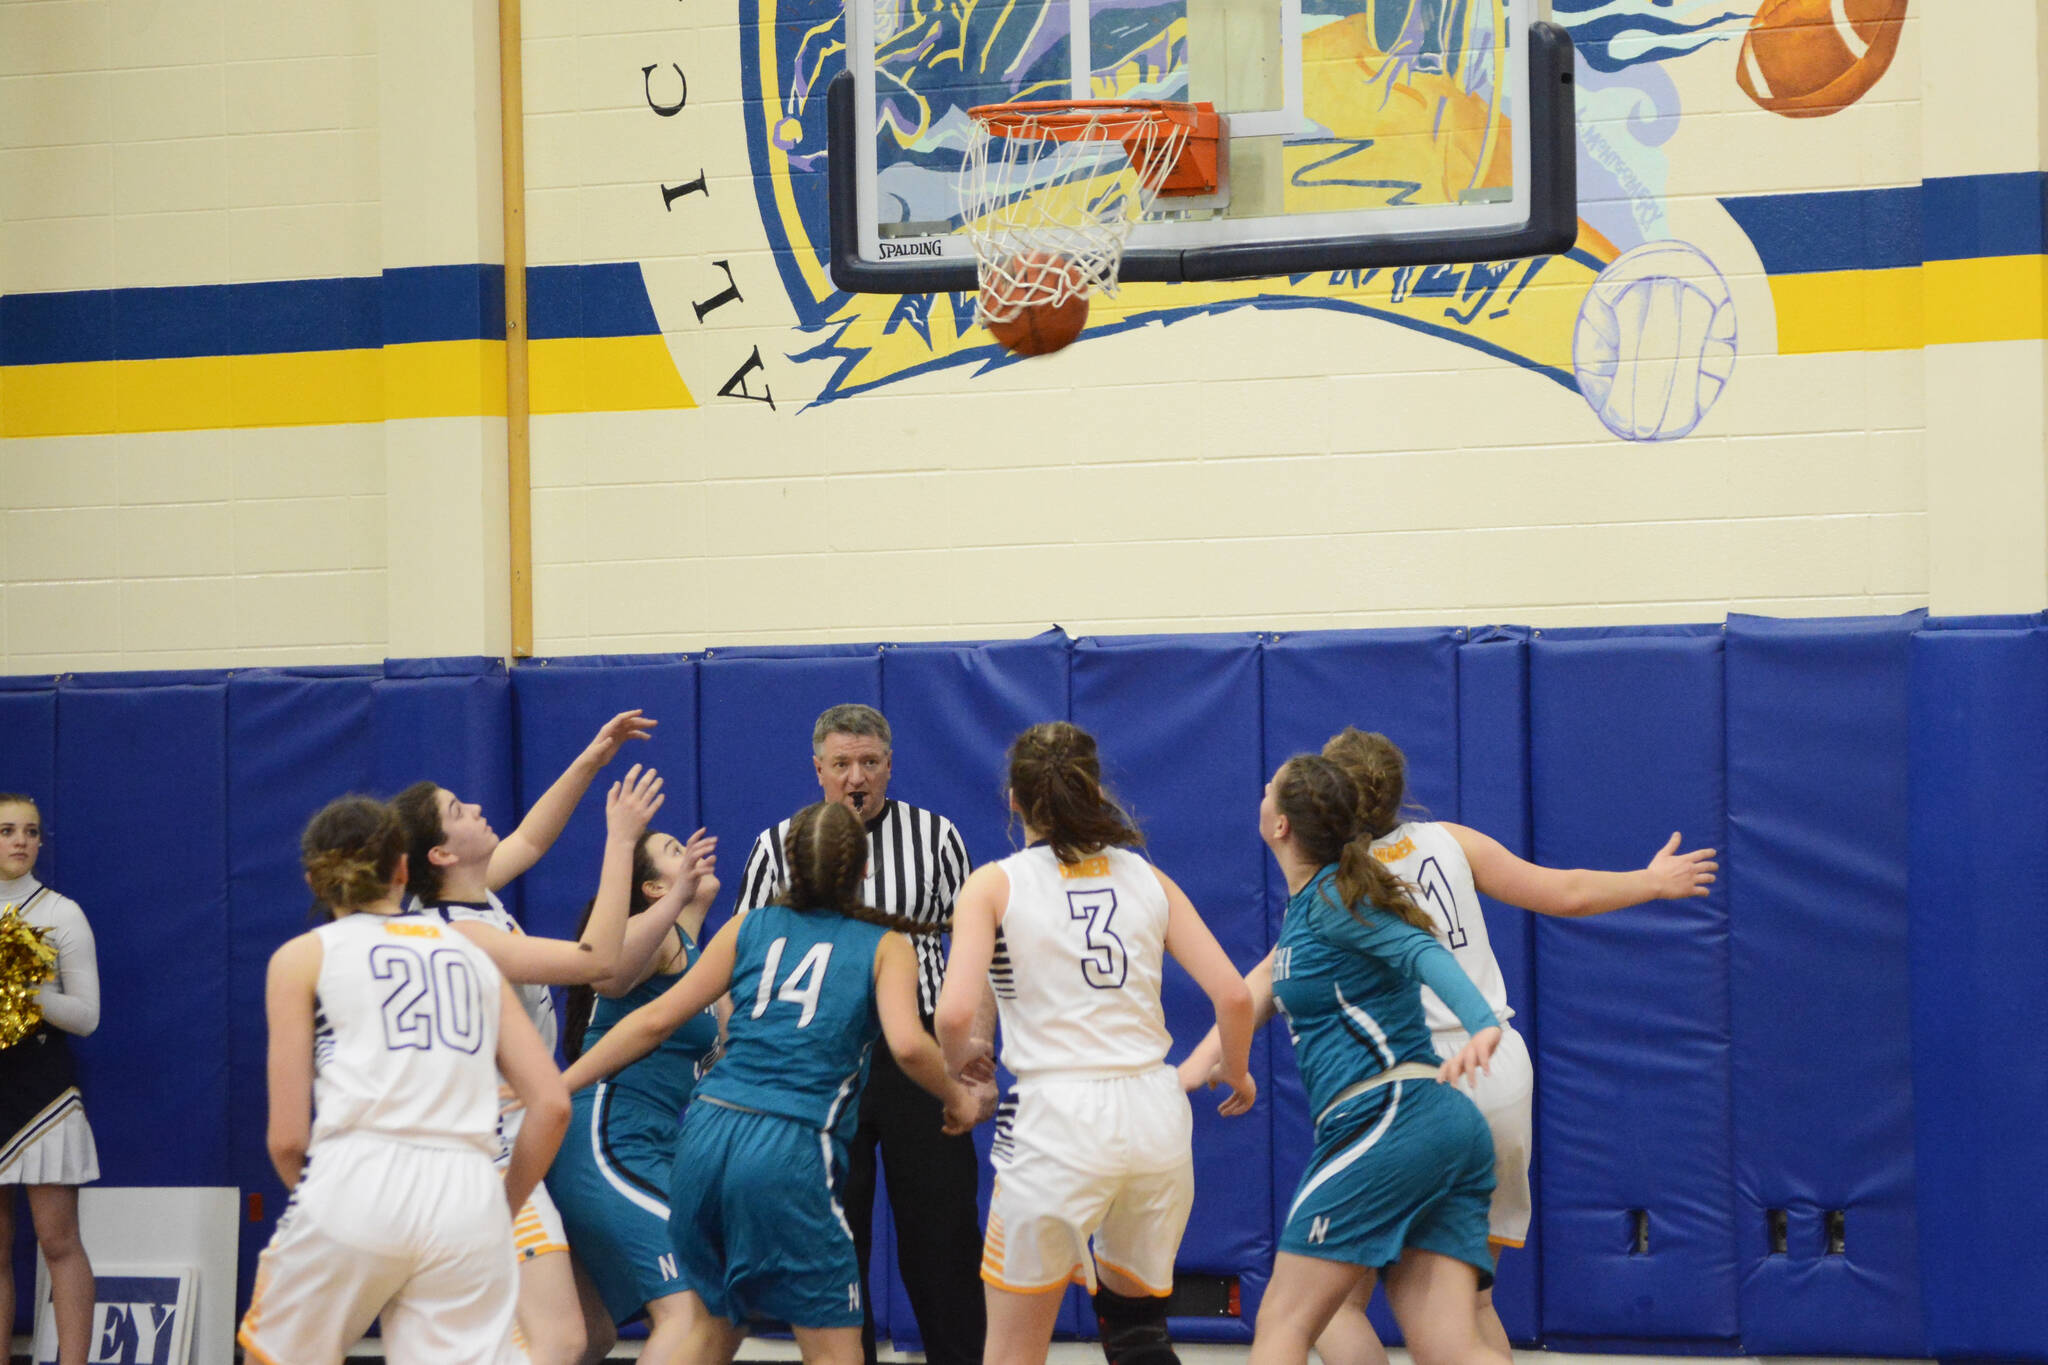 Lady Mariner Delilah Harris makes a basket against the Nikiski Bulldogs during Senior Night on Friday, Feb. 25, 2022, at the Alice Witte Gym at Homer High School in Homer, Alaska. (Photo by Michael Armstrong/Homer News)